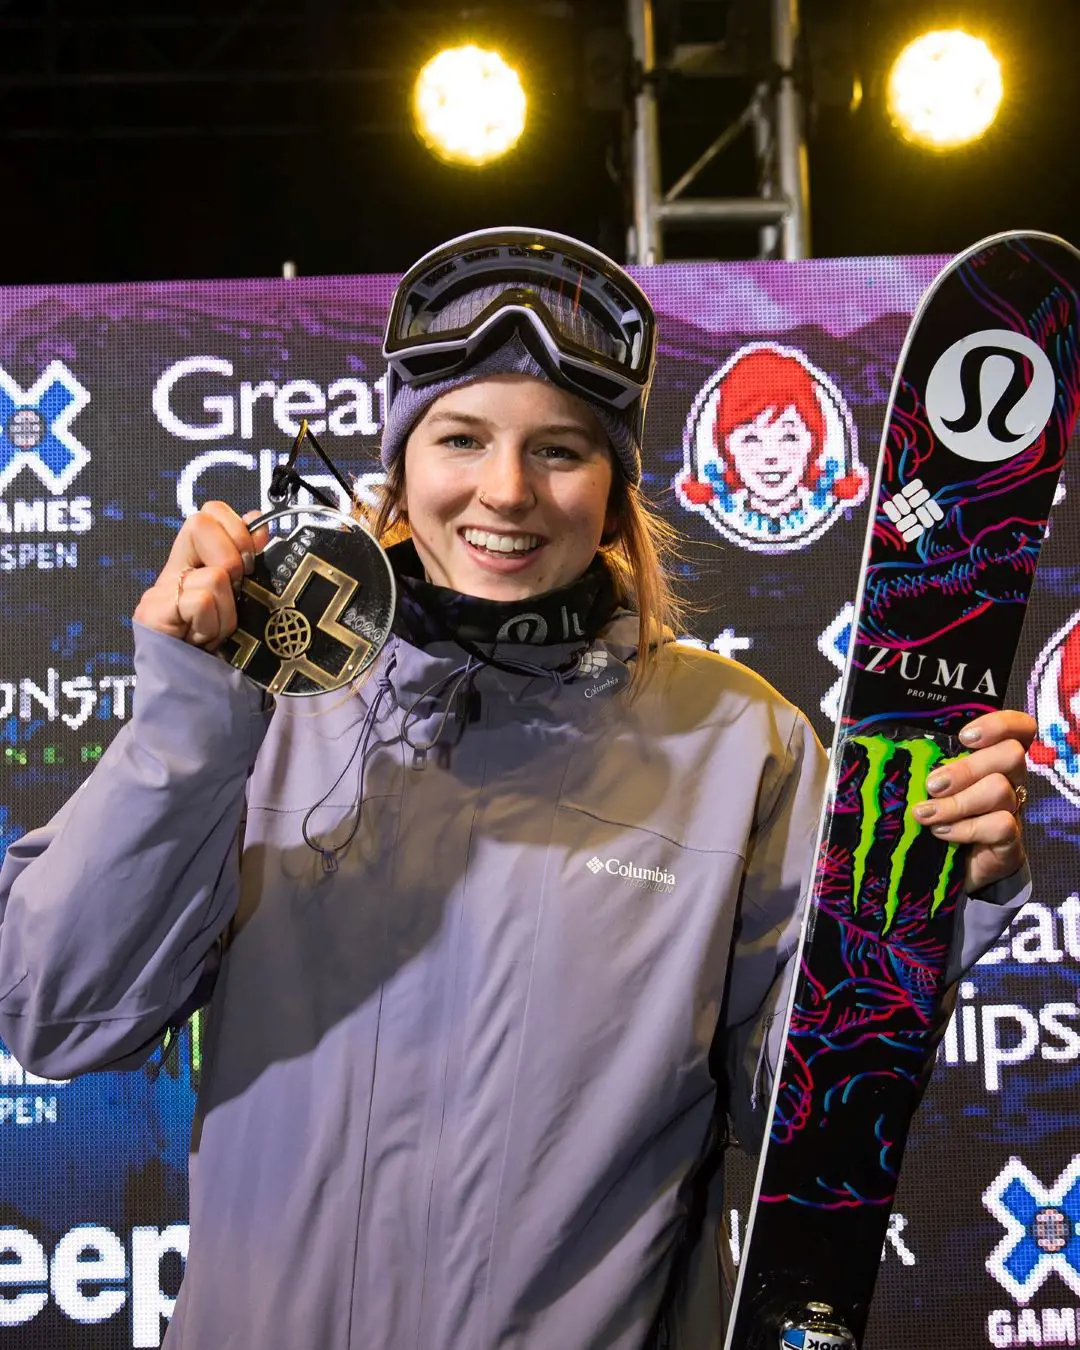 Cassie celebrates winning a bronze medal in the Winter X Games.